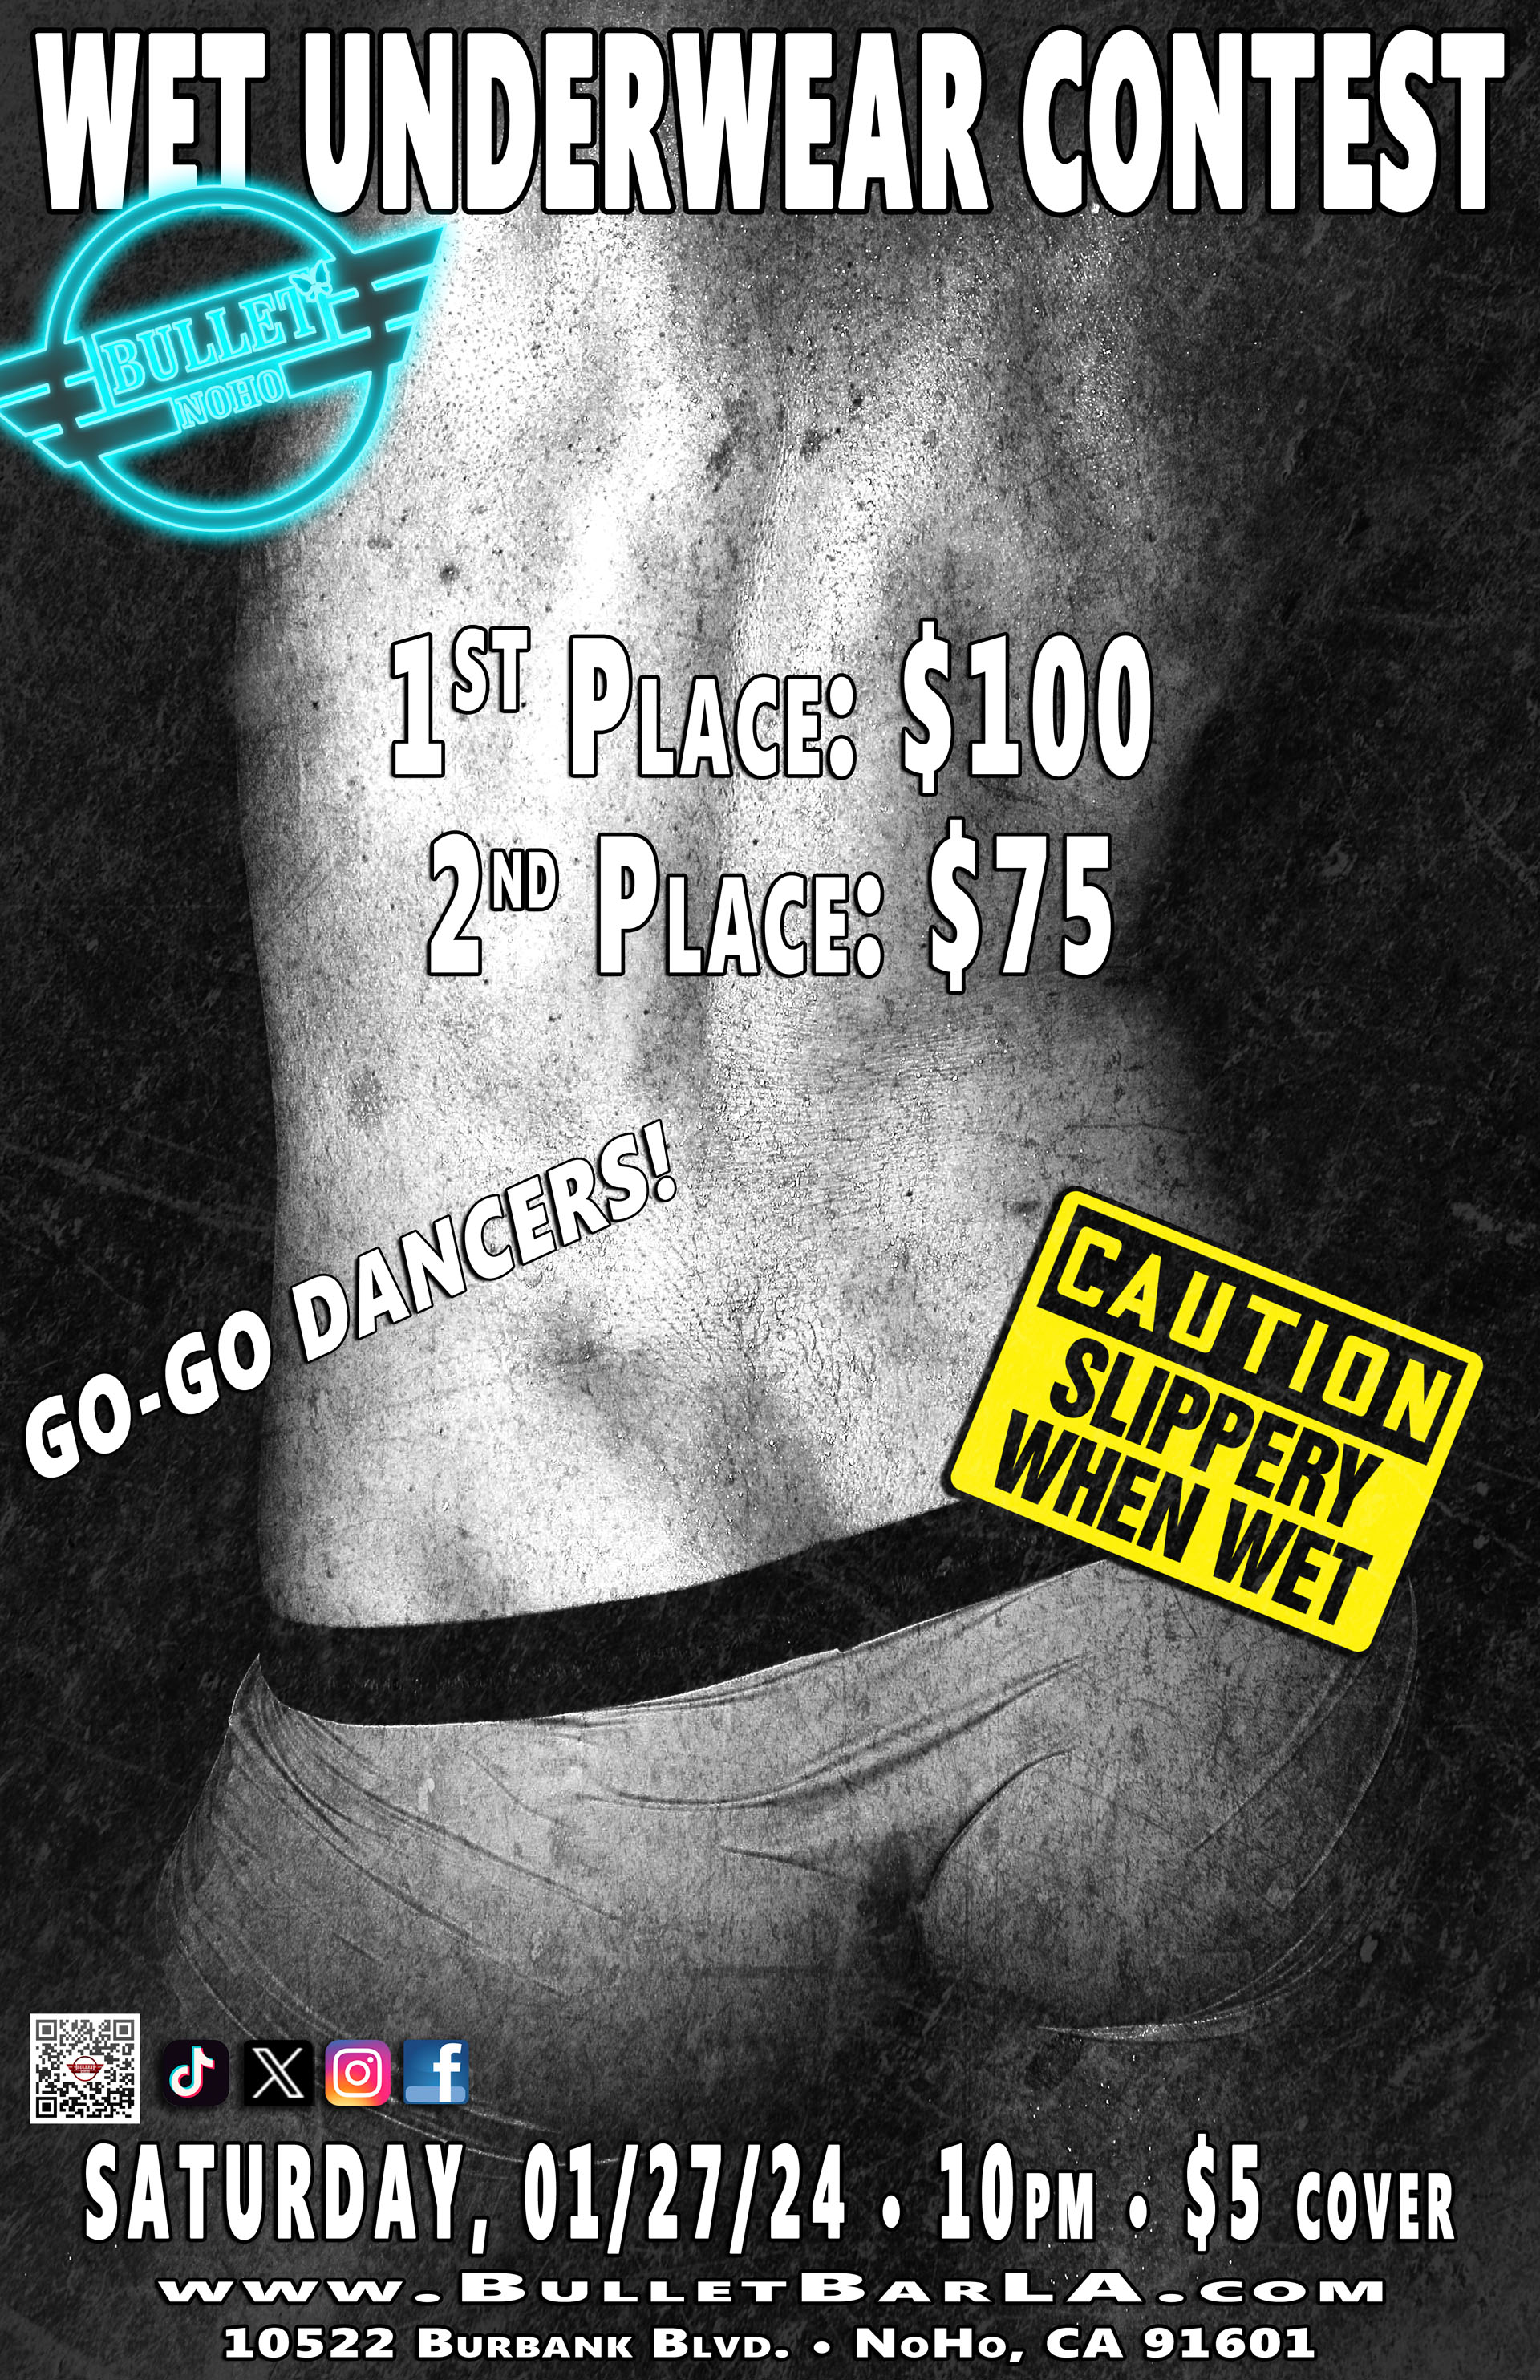 The Bullet Bar Presents WET UNDERWEAR CONTEST: Friday, 01/27/24 at 10:00 PM! 1ST Prize: $100! 2ND Prize: $75! Go-Go Dancers! $5 cover.